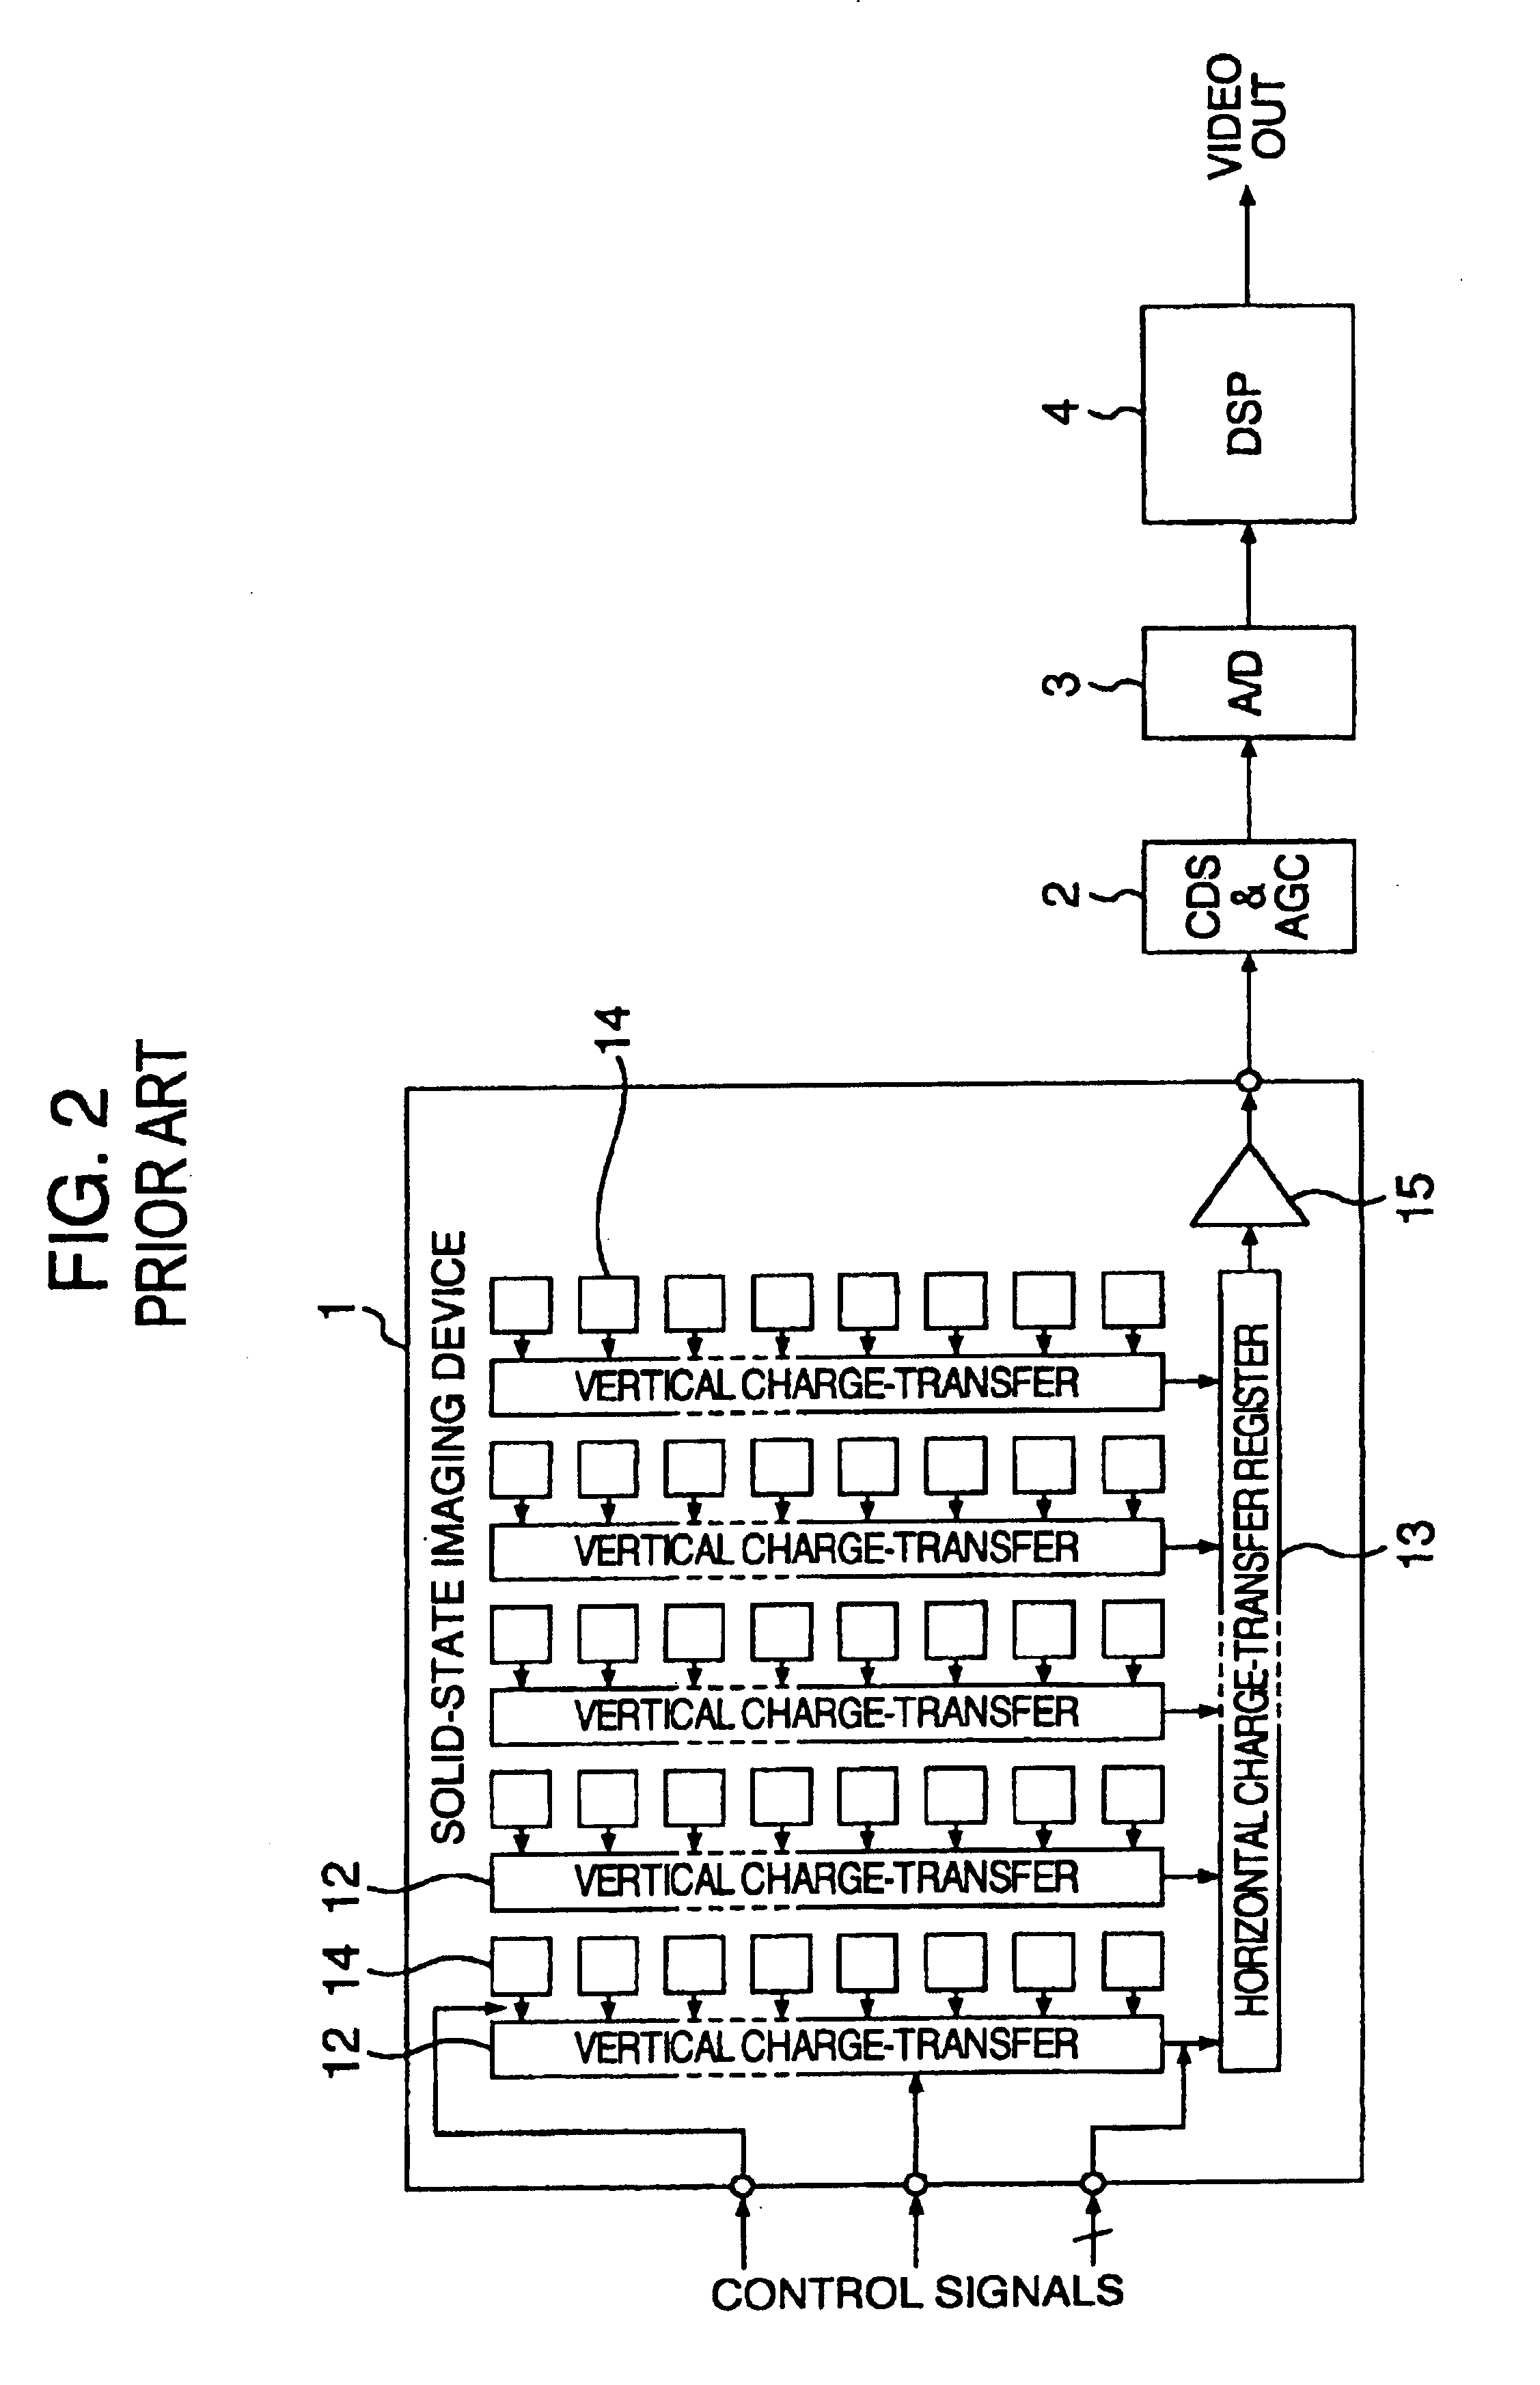 Method of processing image signal from solid-state imaging device, image signal processing apparatus, image signal generating apparatus and computer program product for image signal processing method